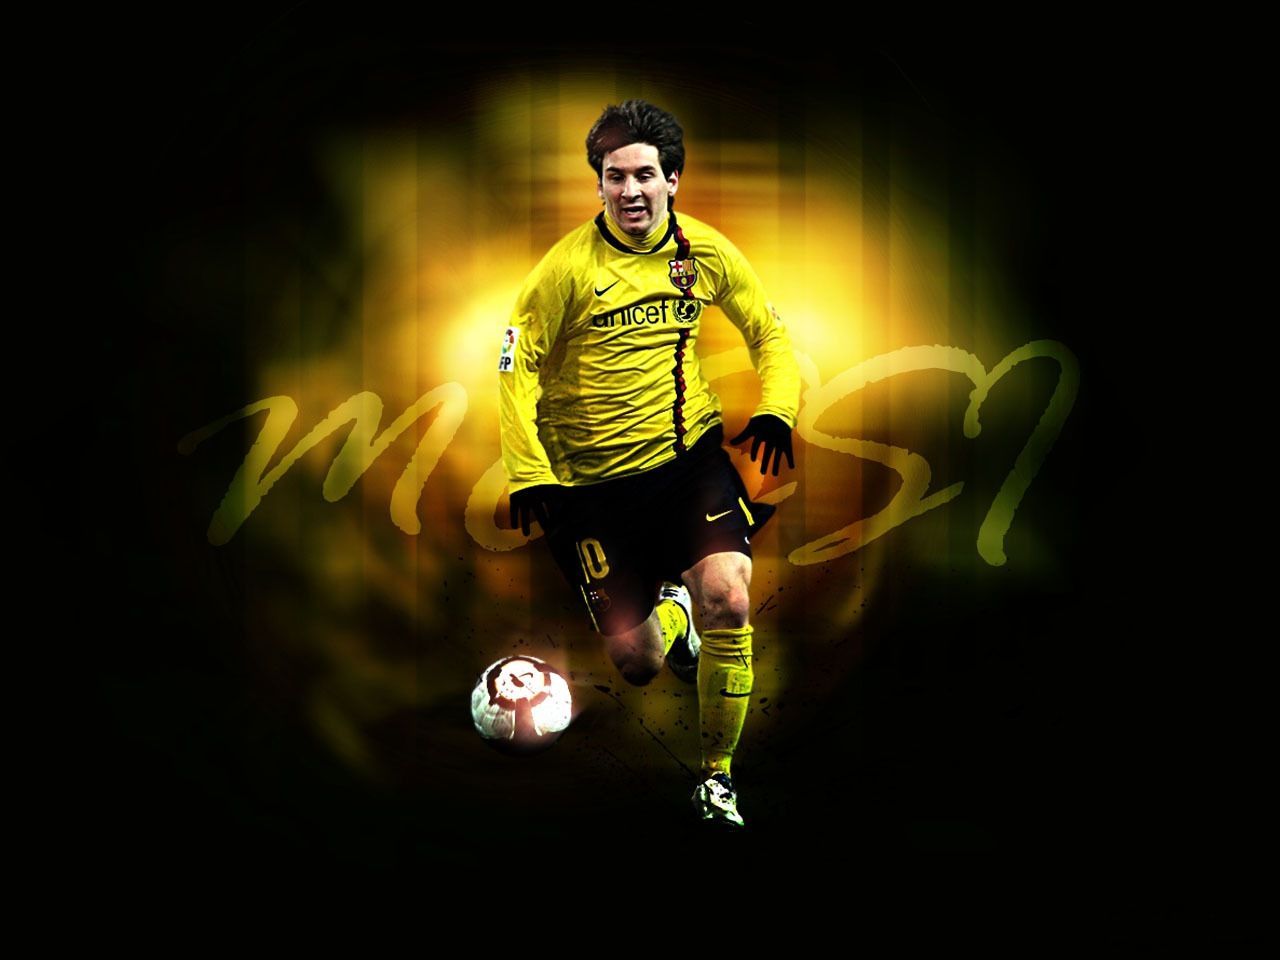 Football Super Star Player: Lionel Messi New HD Wallpapers 2013